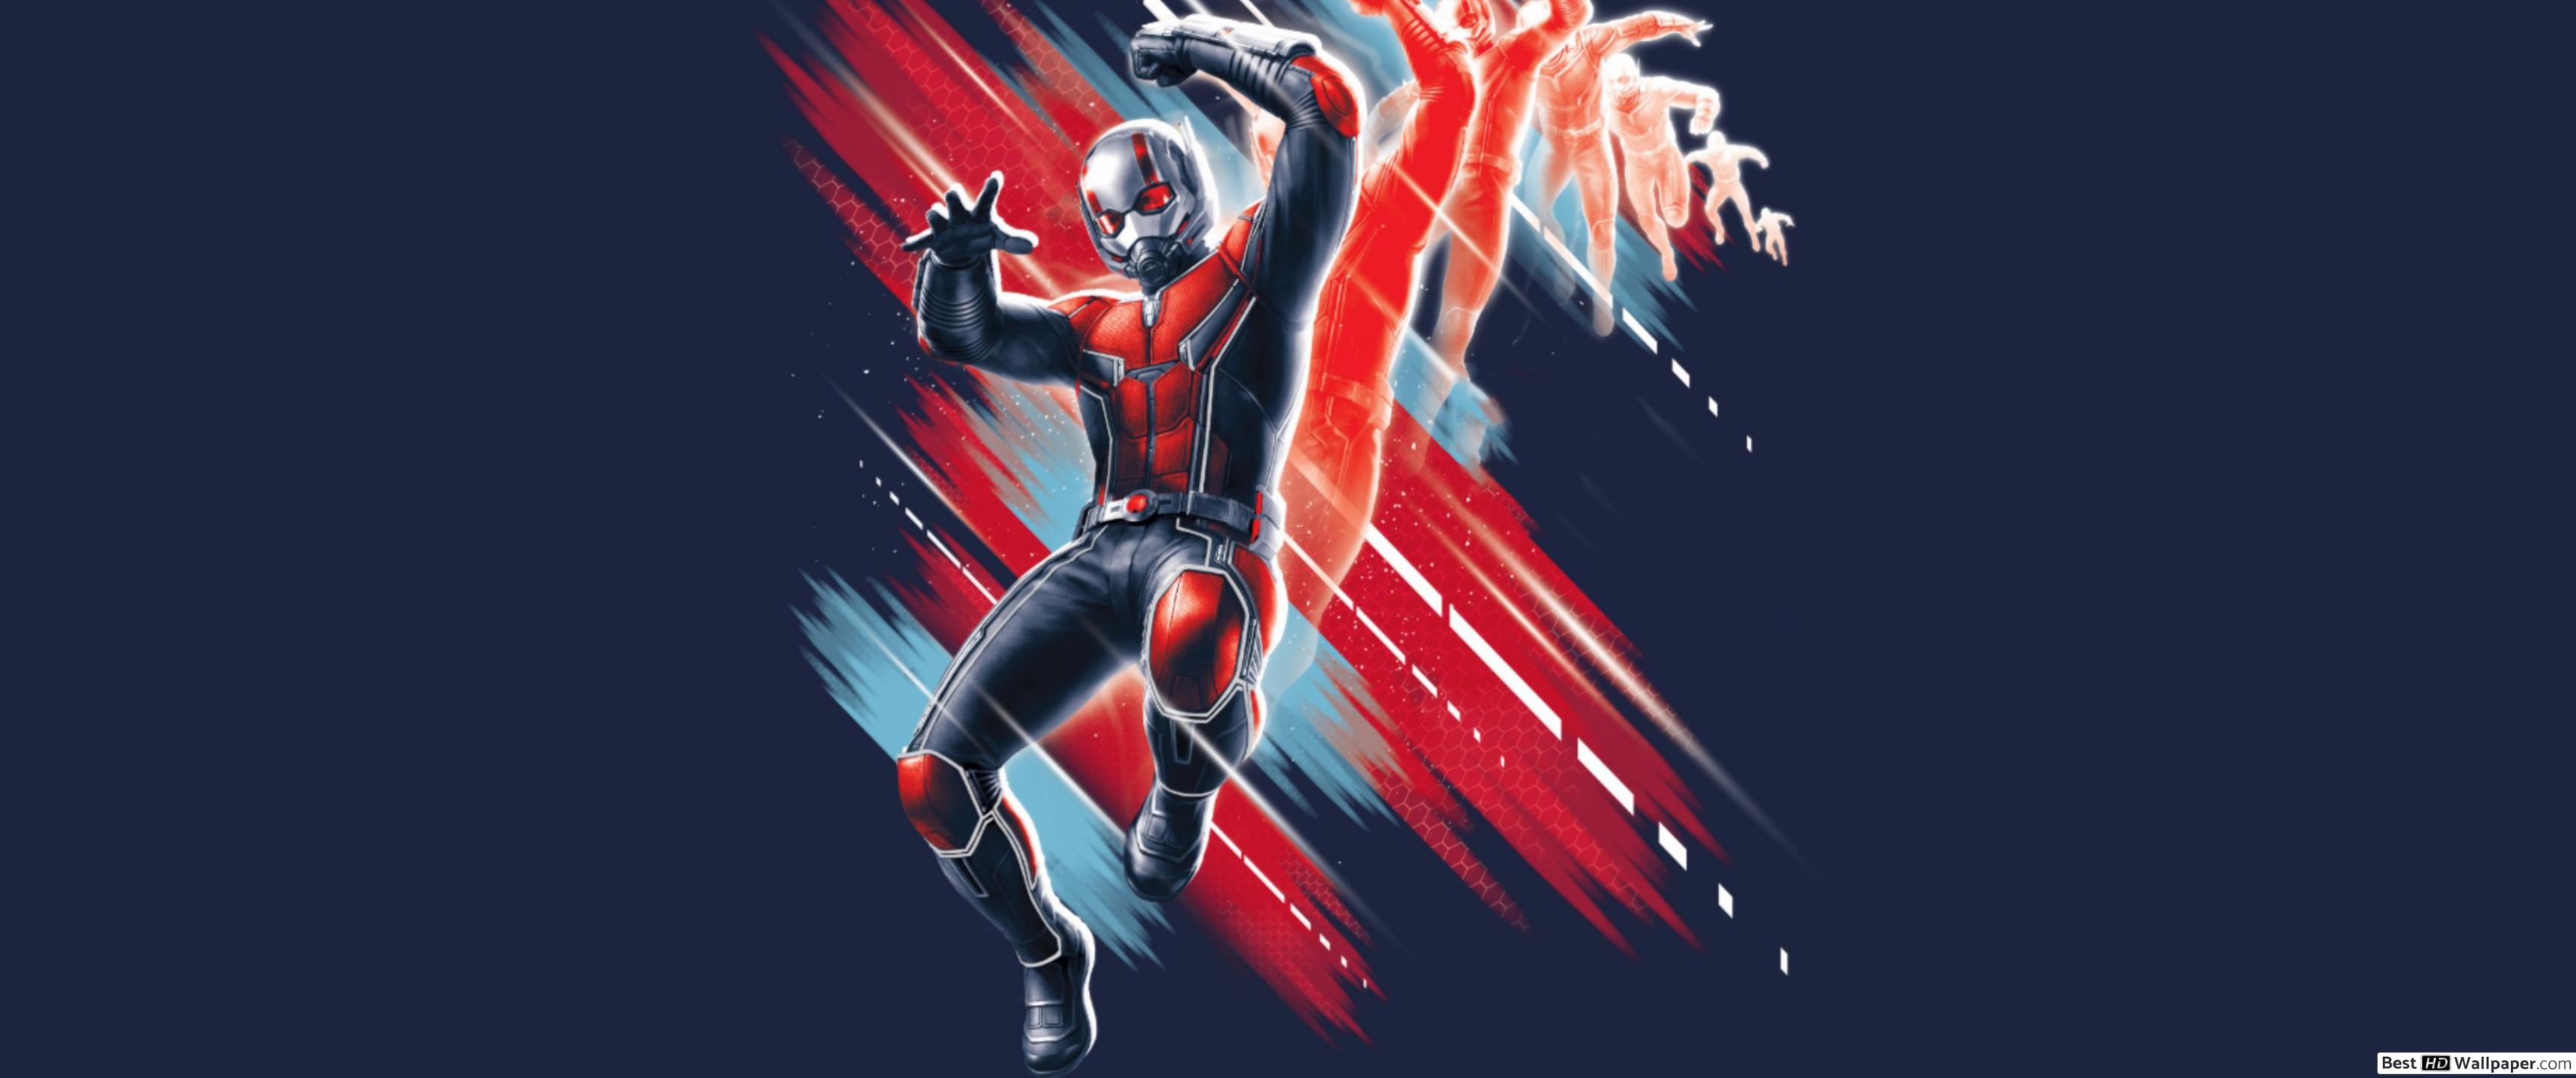 Ant Man And The Wasp (Fan Art) HD Wallpaper Download